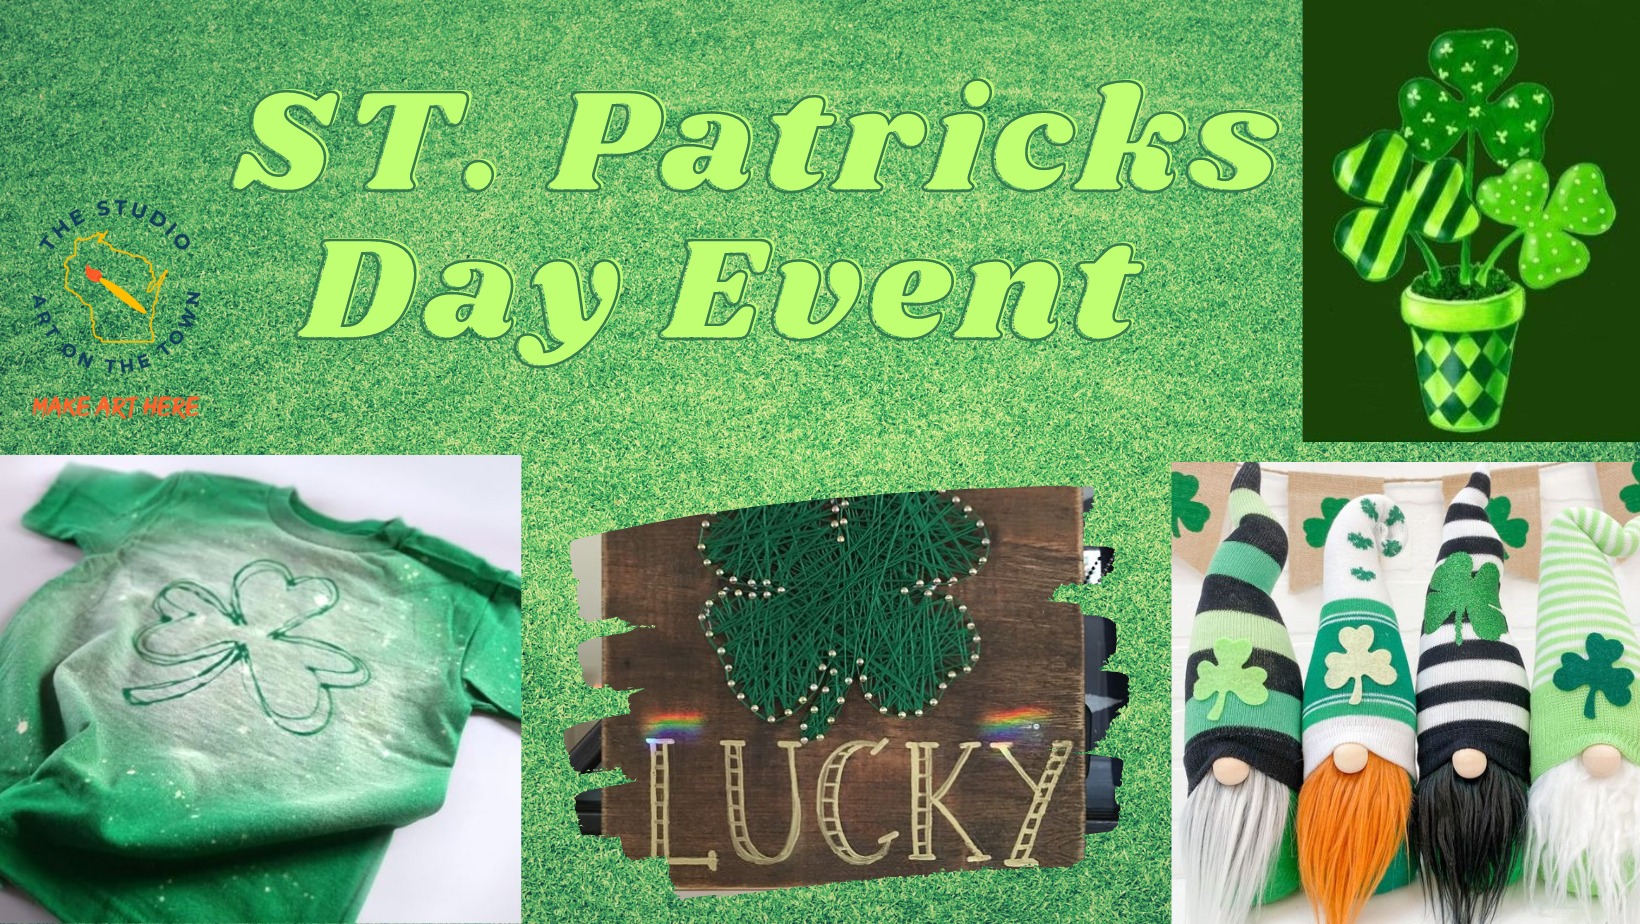 St. Patrick's Day Event